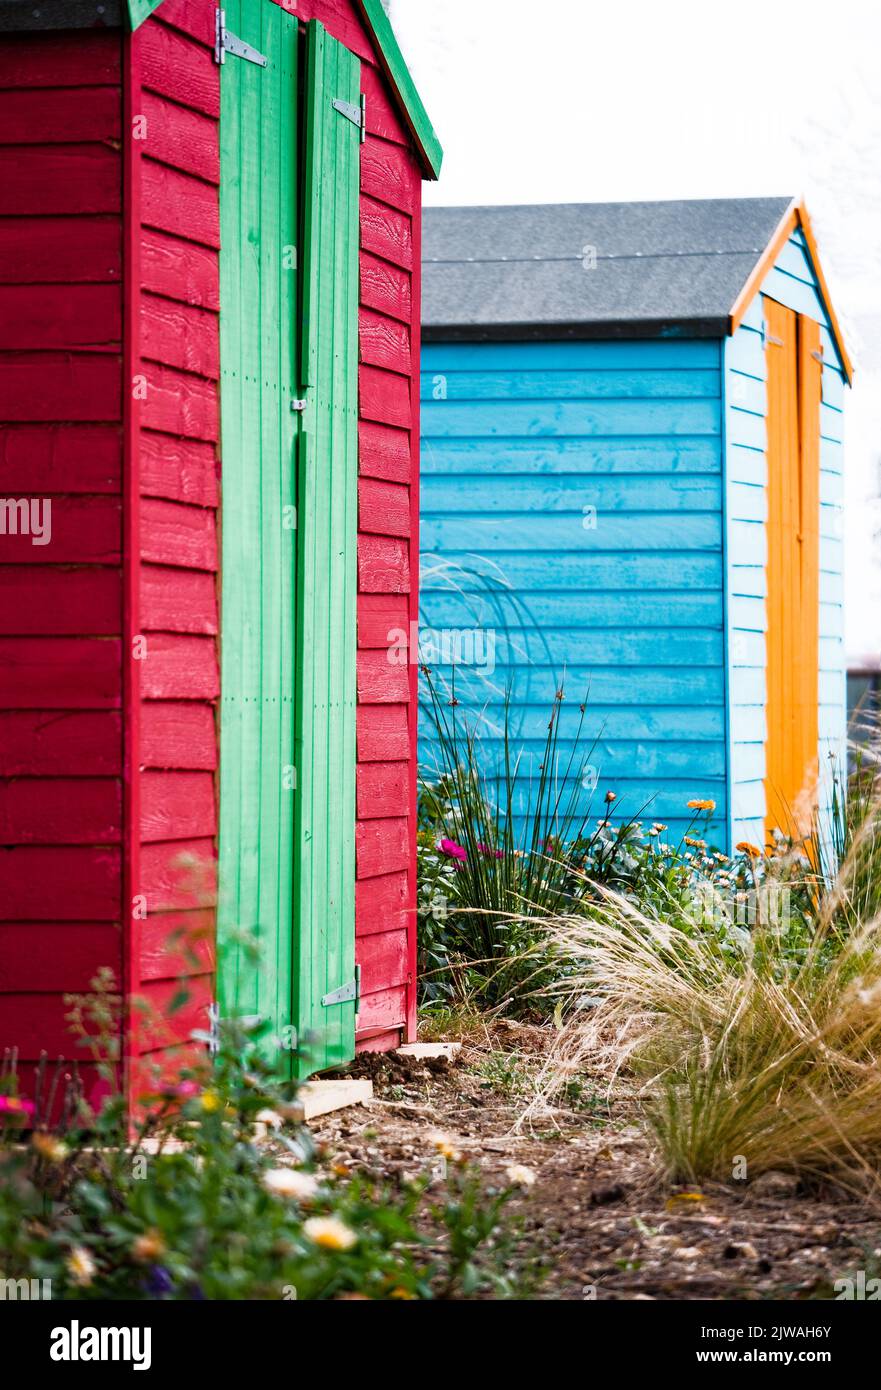 Brightly coloured wooden allotment sheds. Stock Photo